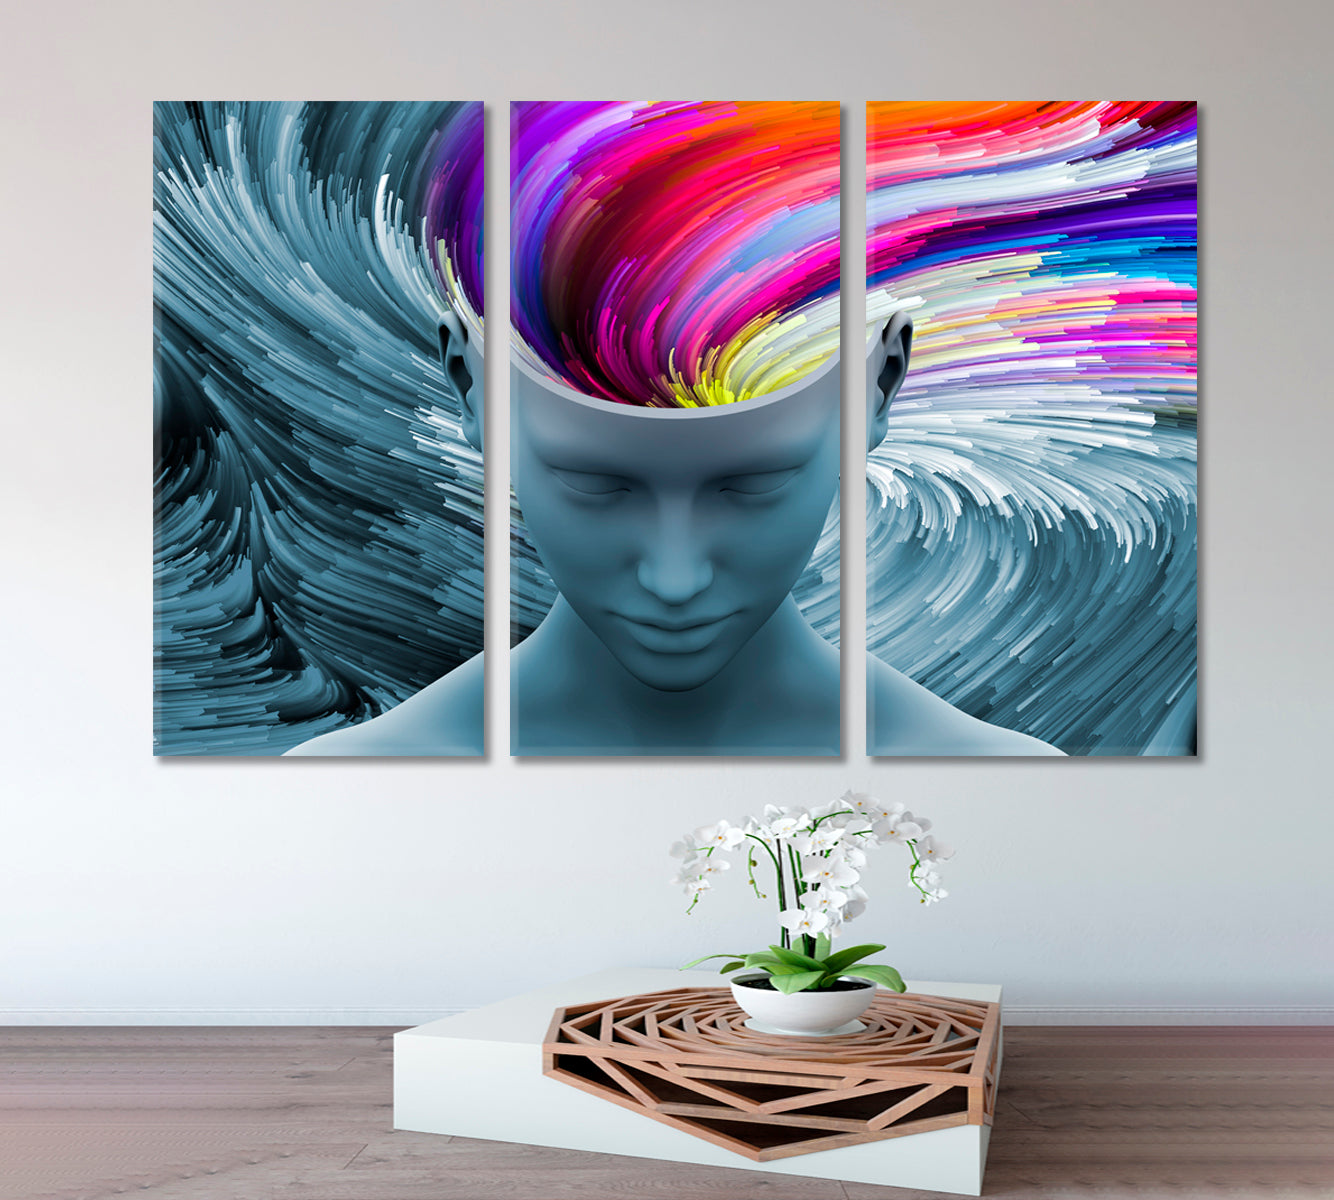 IMAGINATION AND DREAMS Swirls Color Motion Consciousness Art Artesty 3 panels 36" x 24" 